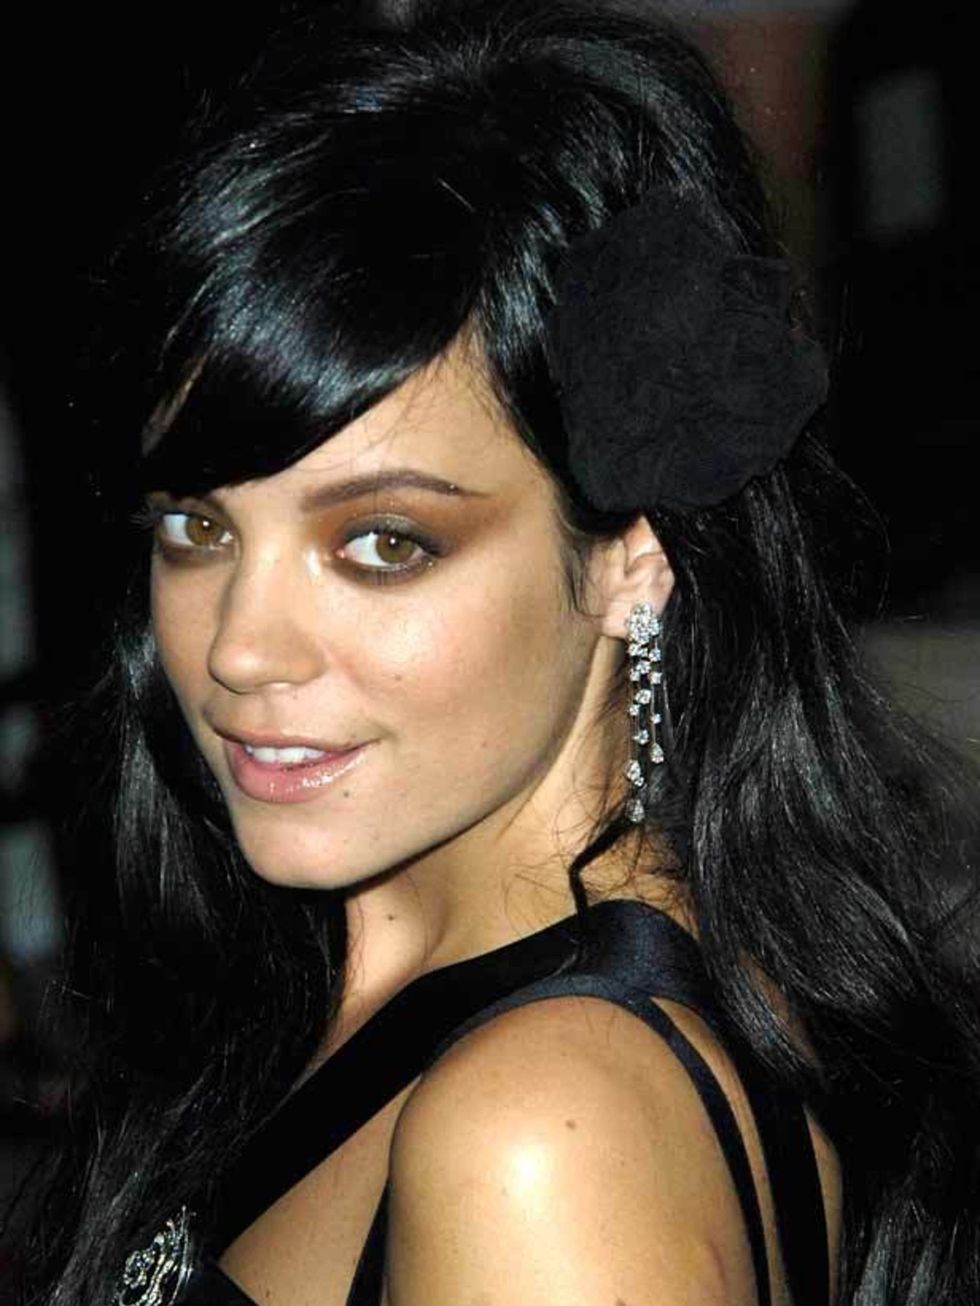 <p><a href="http://www.elleuk.com/in-the-mag/feature/%28section%29/exclusive-lily-allen">Click here to read more about Lily Allen and see her Style File</a></p>